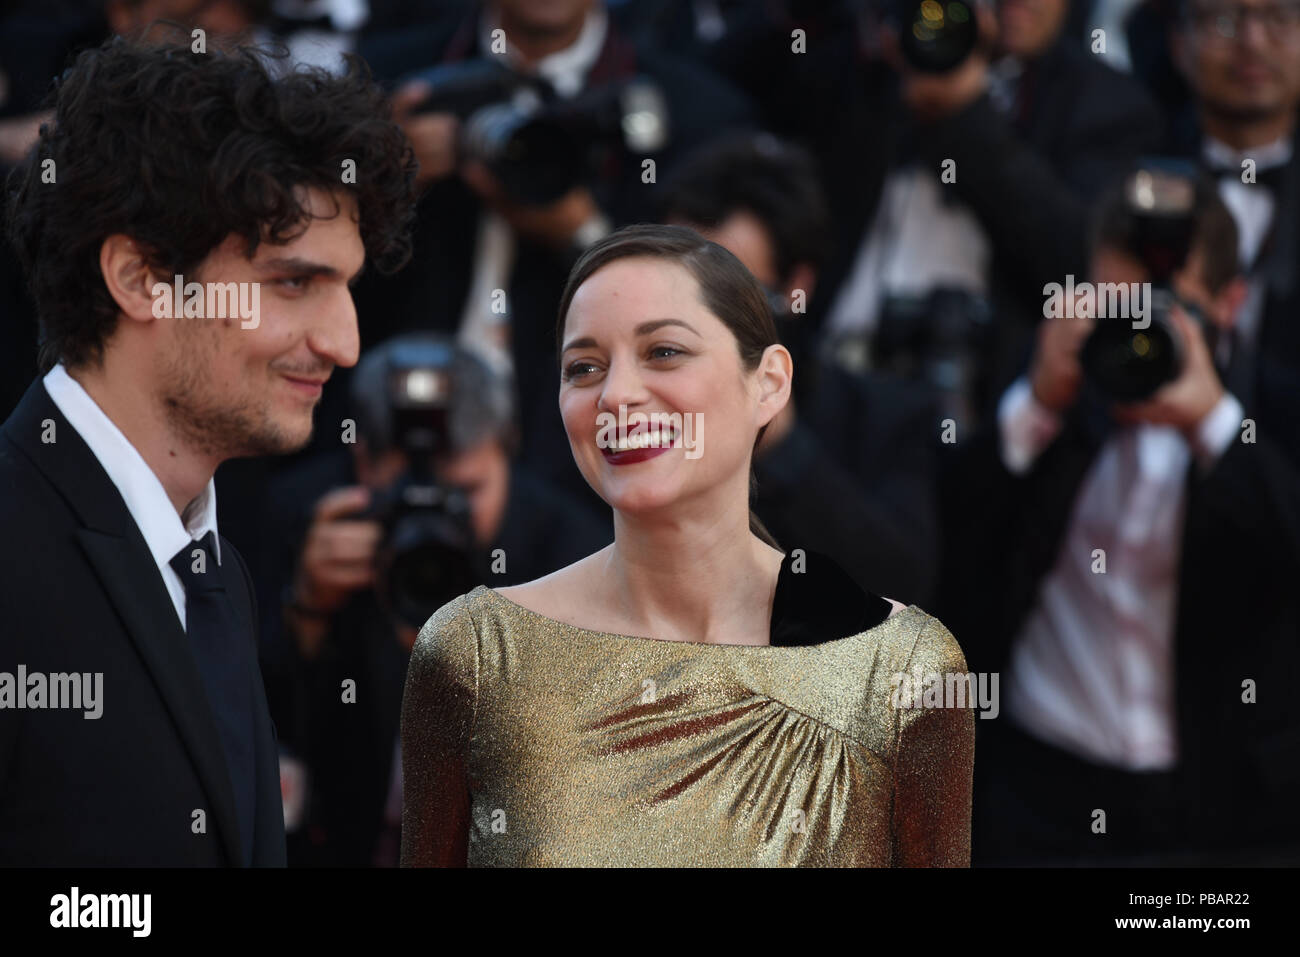 May 15, 2016 - Cannes, France: Marion Cotillard and Louis Garrel attend  the 'Mal de Pierres' premiere during the 69th Cannes film festiva Marion Cotillard lors du 69eme Festival de Cannes. *** FRANCE OUT / NO SALES TO FRENCH MEDIA *** Stock Photo